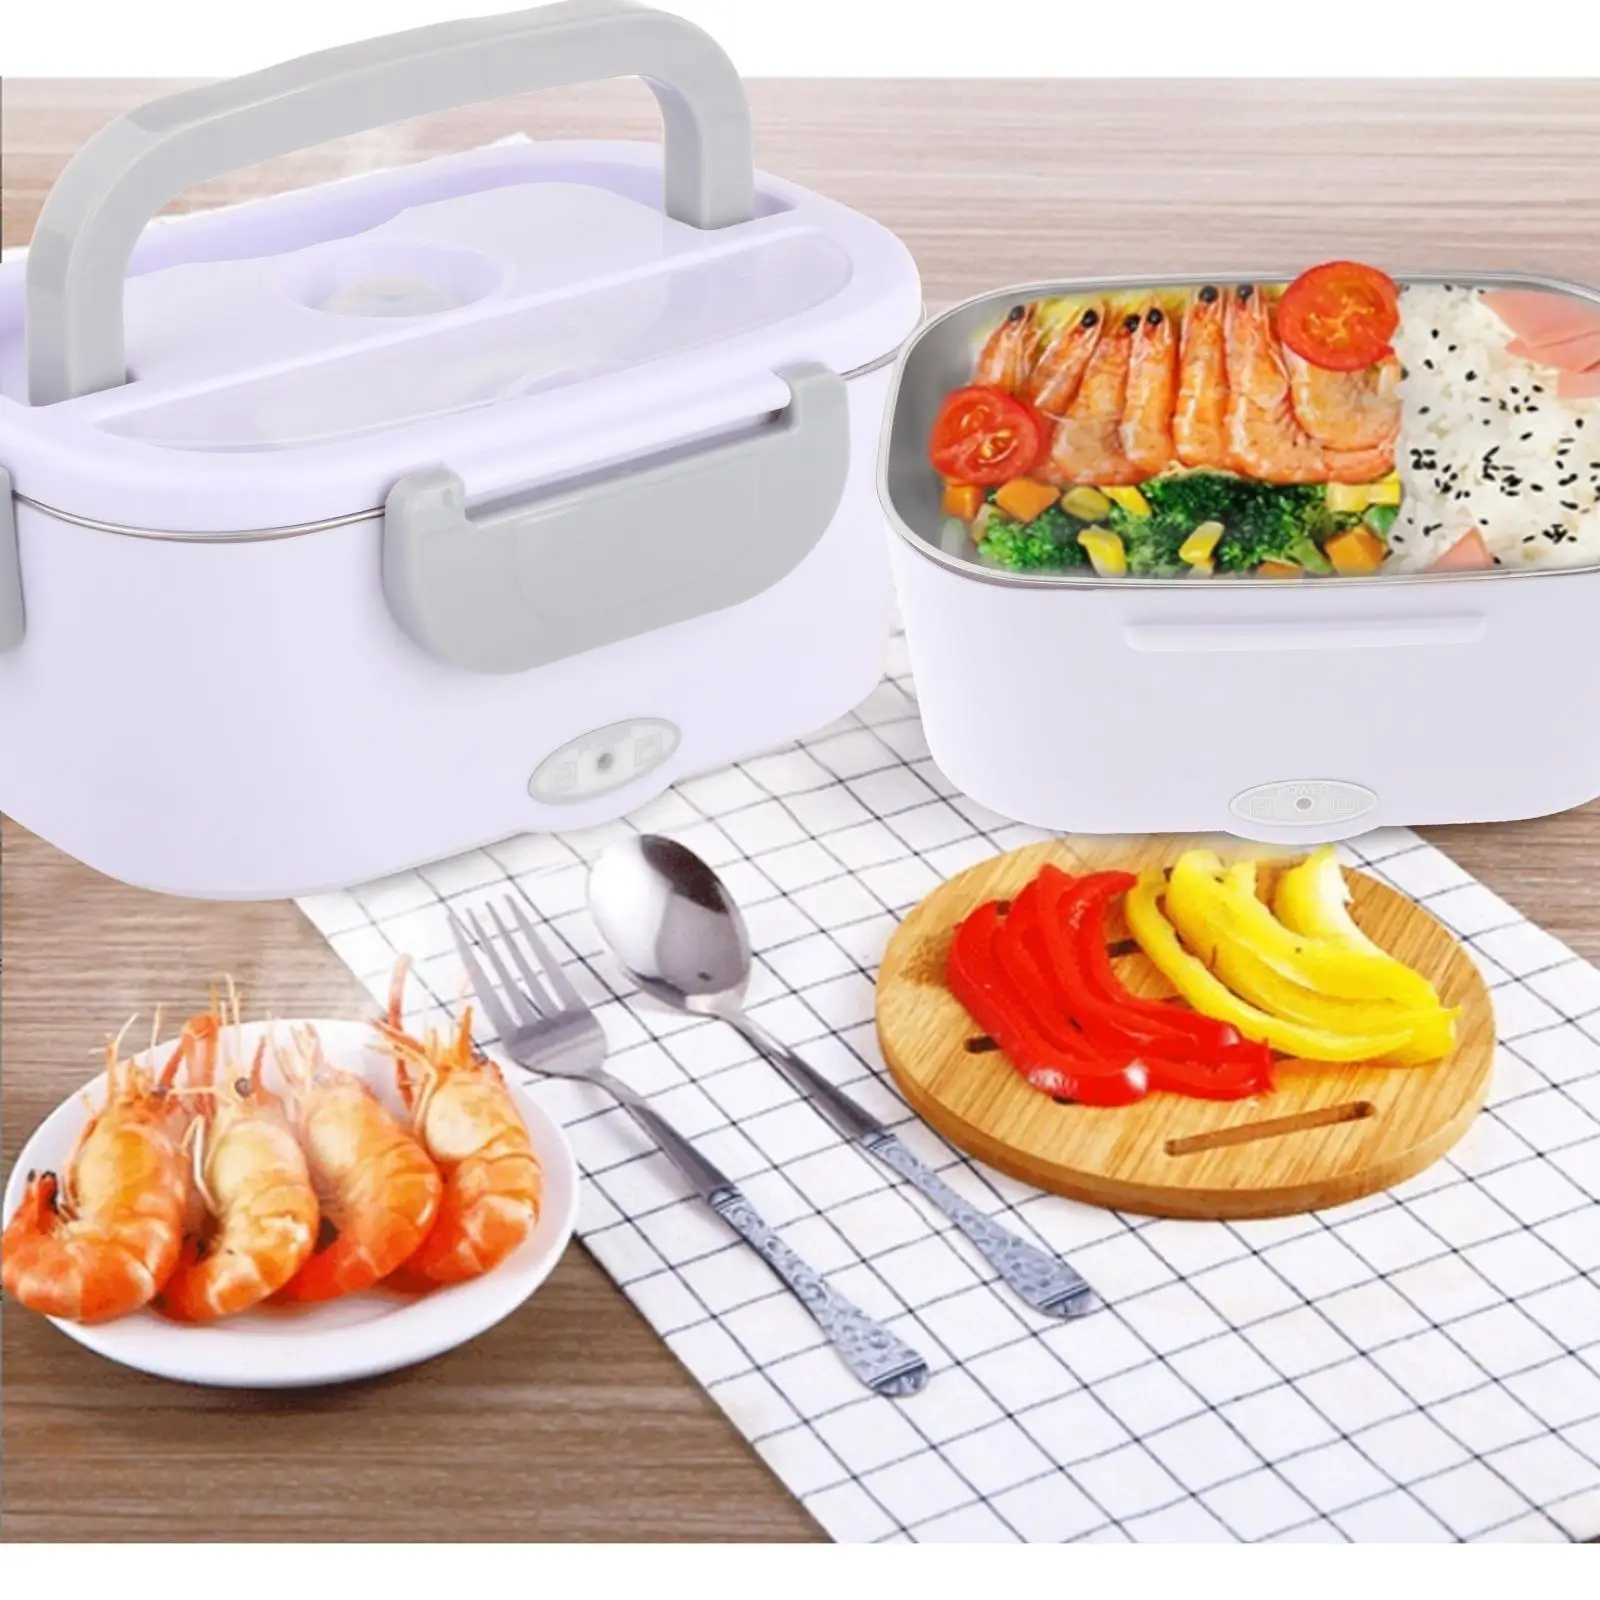 2-in-1 Dual Use Electric Lunch Box Portable 12V 1.5L Heated Food Container